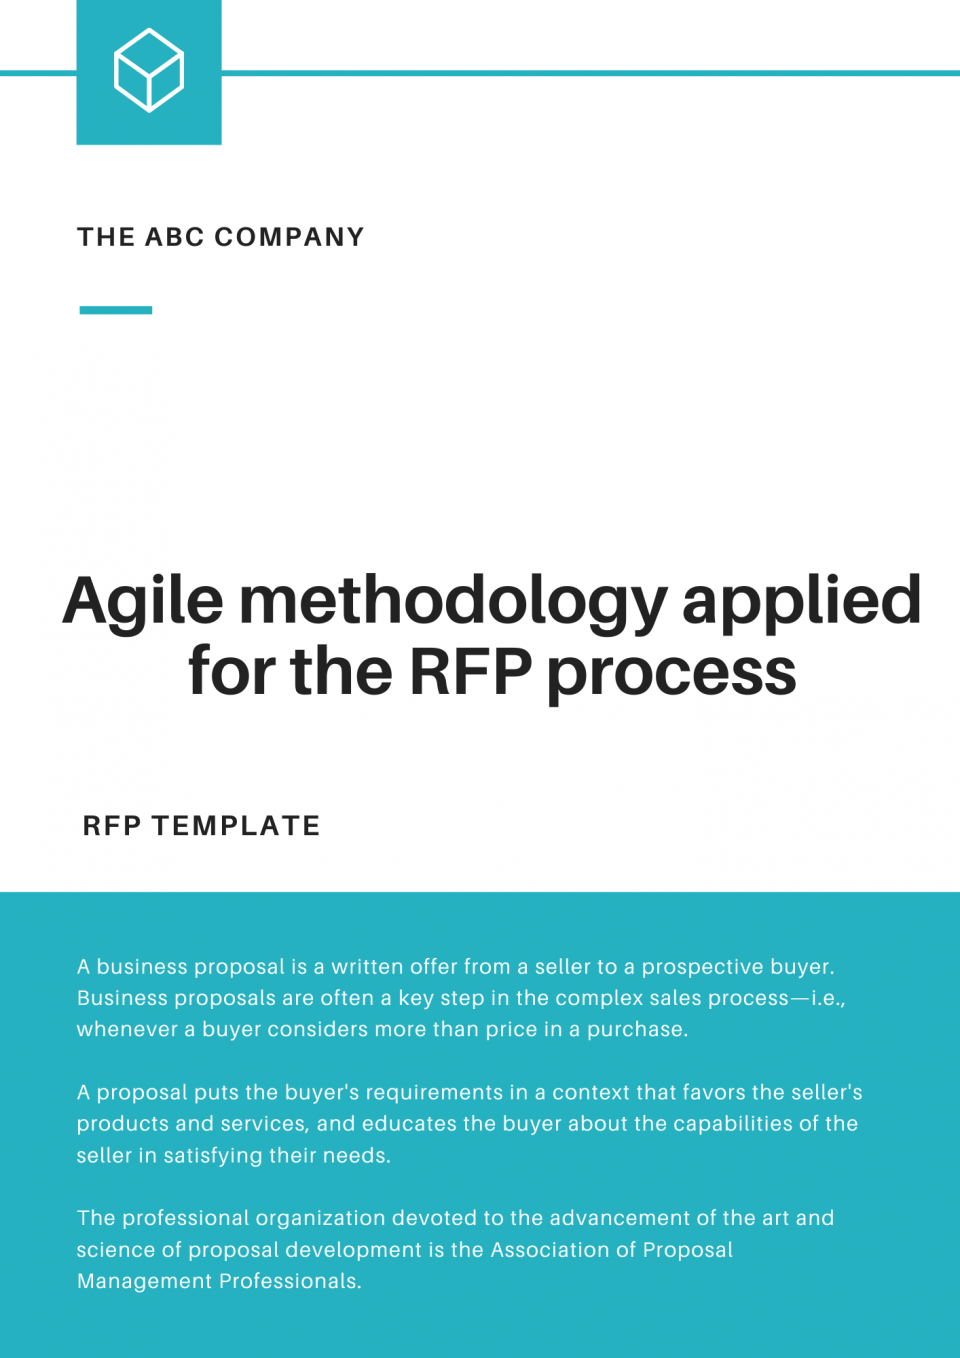 Agile methodology applied to the RFP process